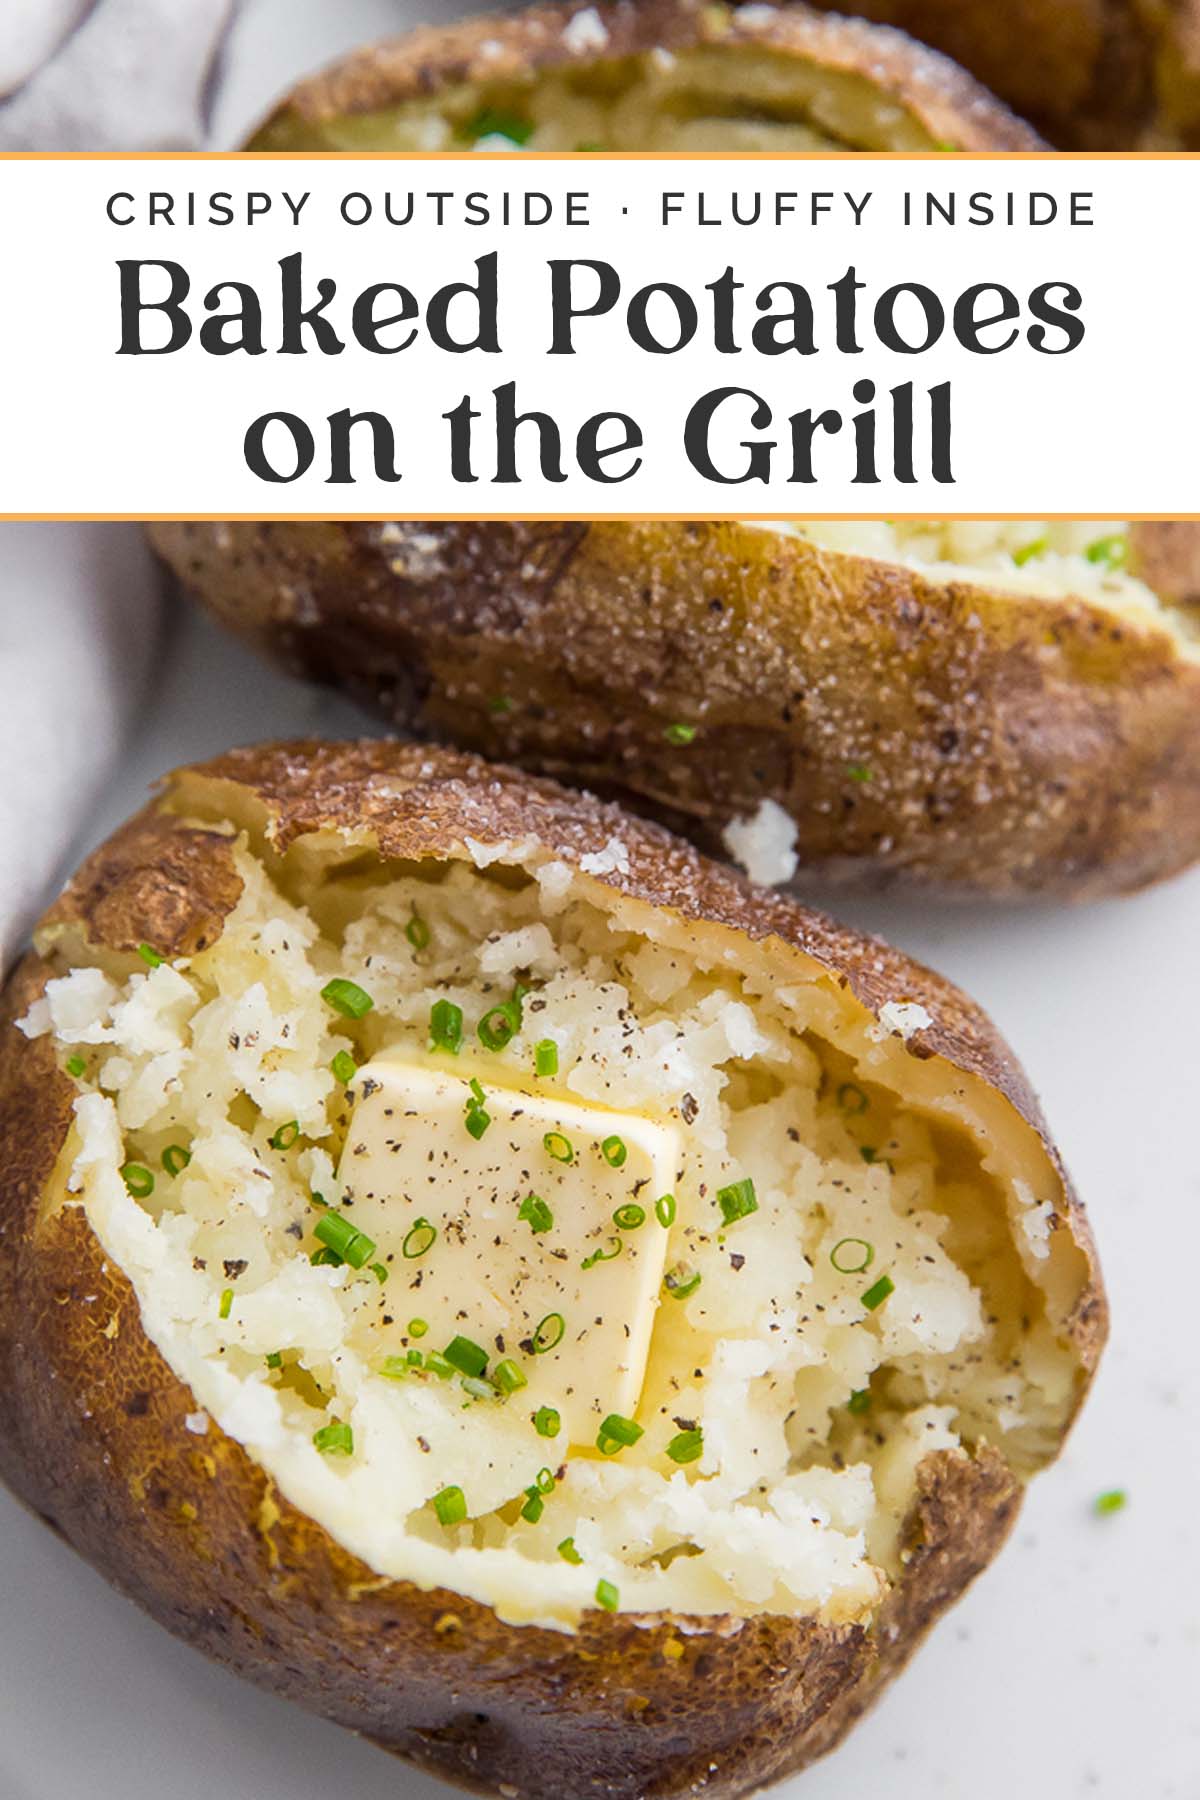 Baked Potatoes on the Grill - 40 Aprons